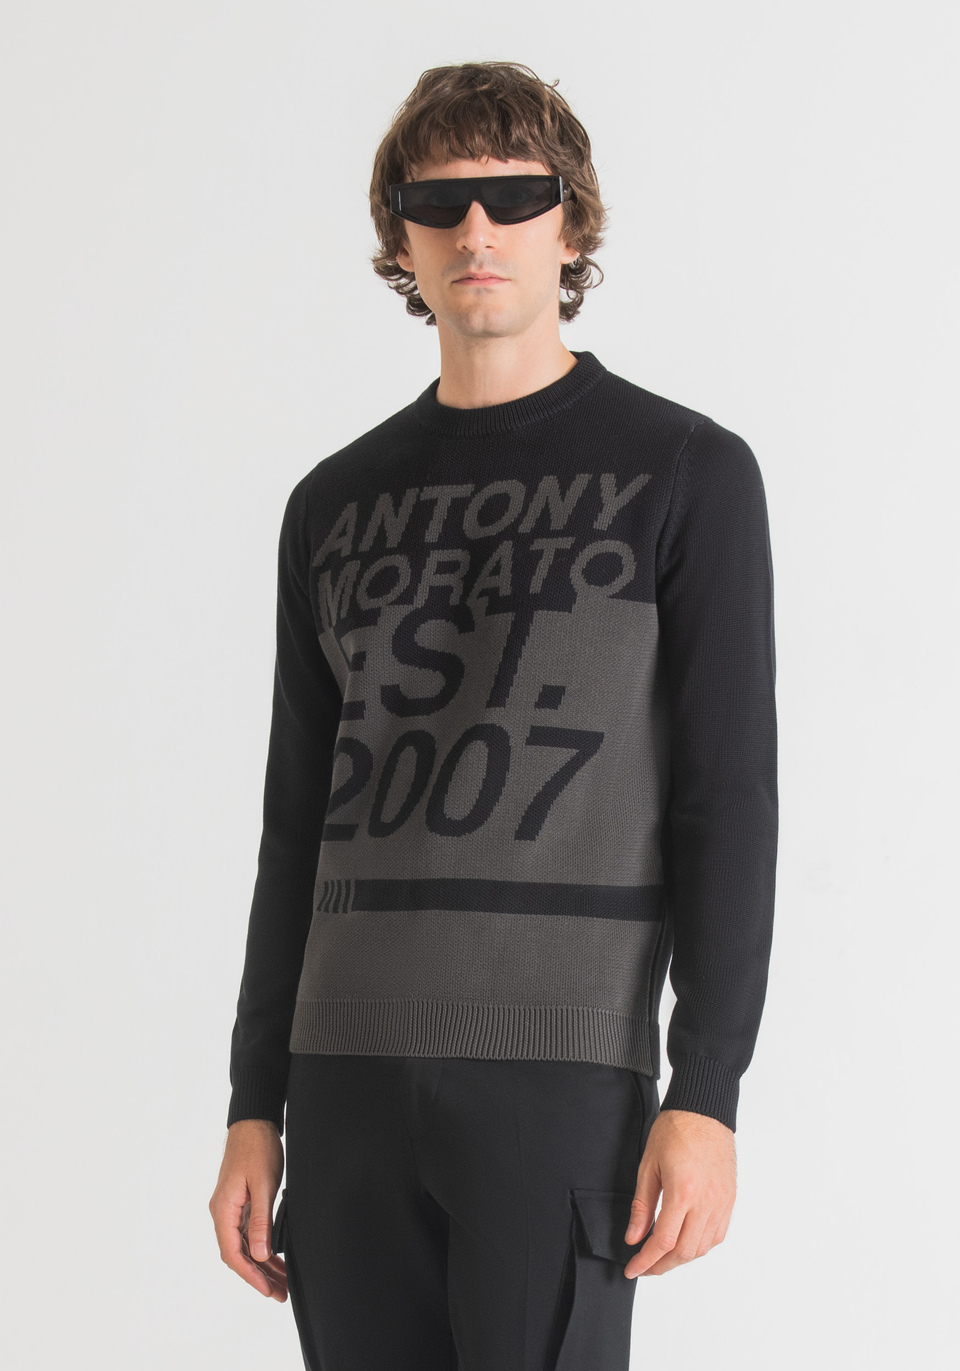 SLIM FIT SWEATER IN SOFT COTTON YARN WITH CONTRASTING JACQUARD KNIT - Antony Morato Online Shop